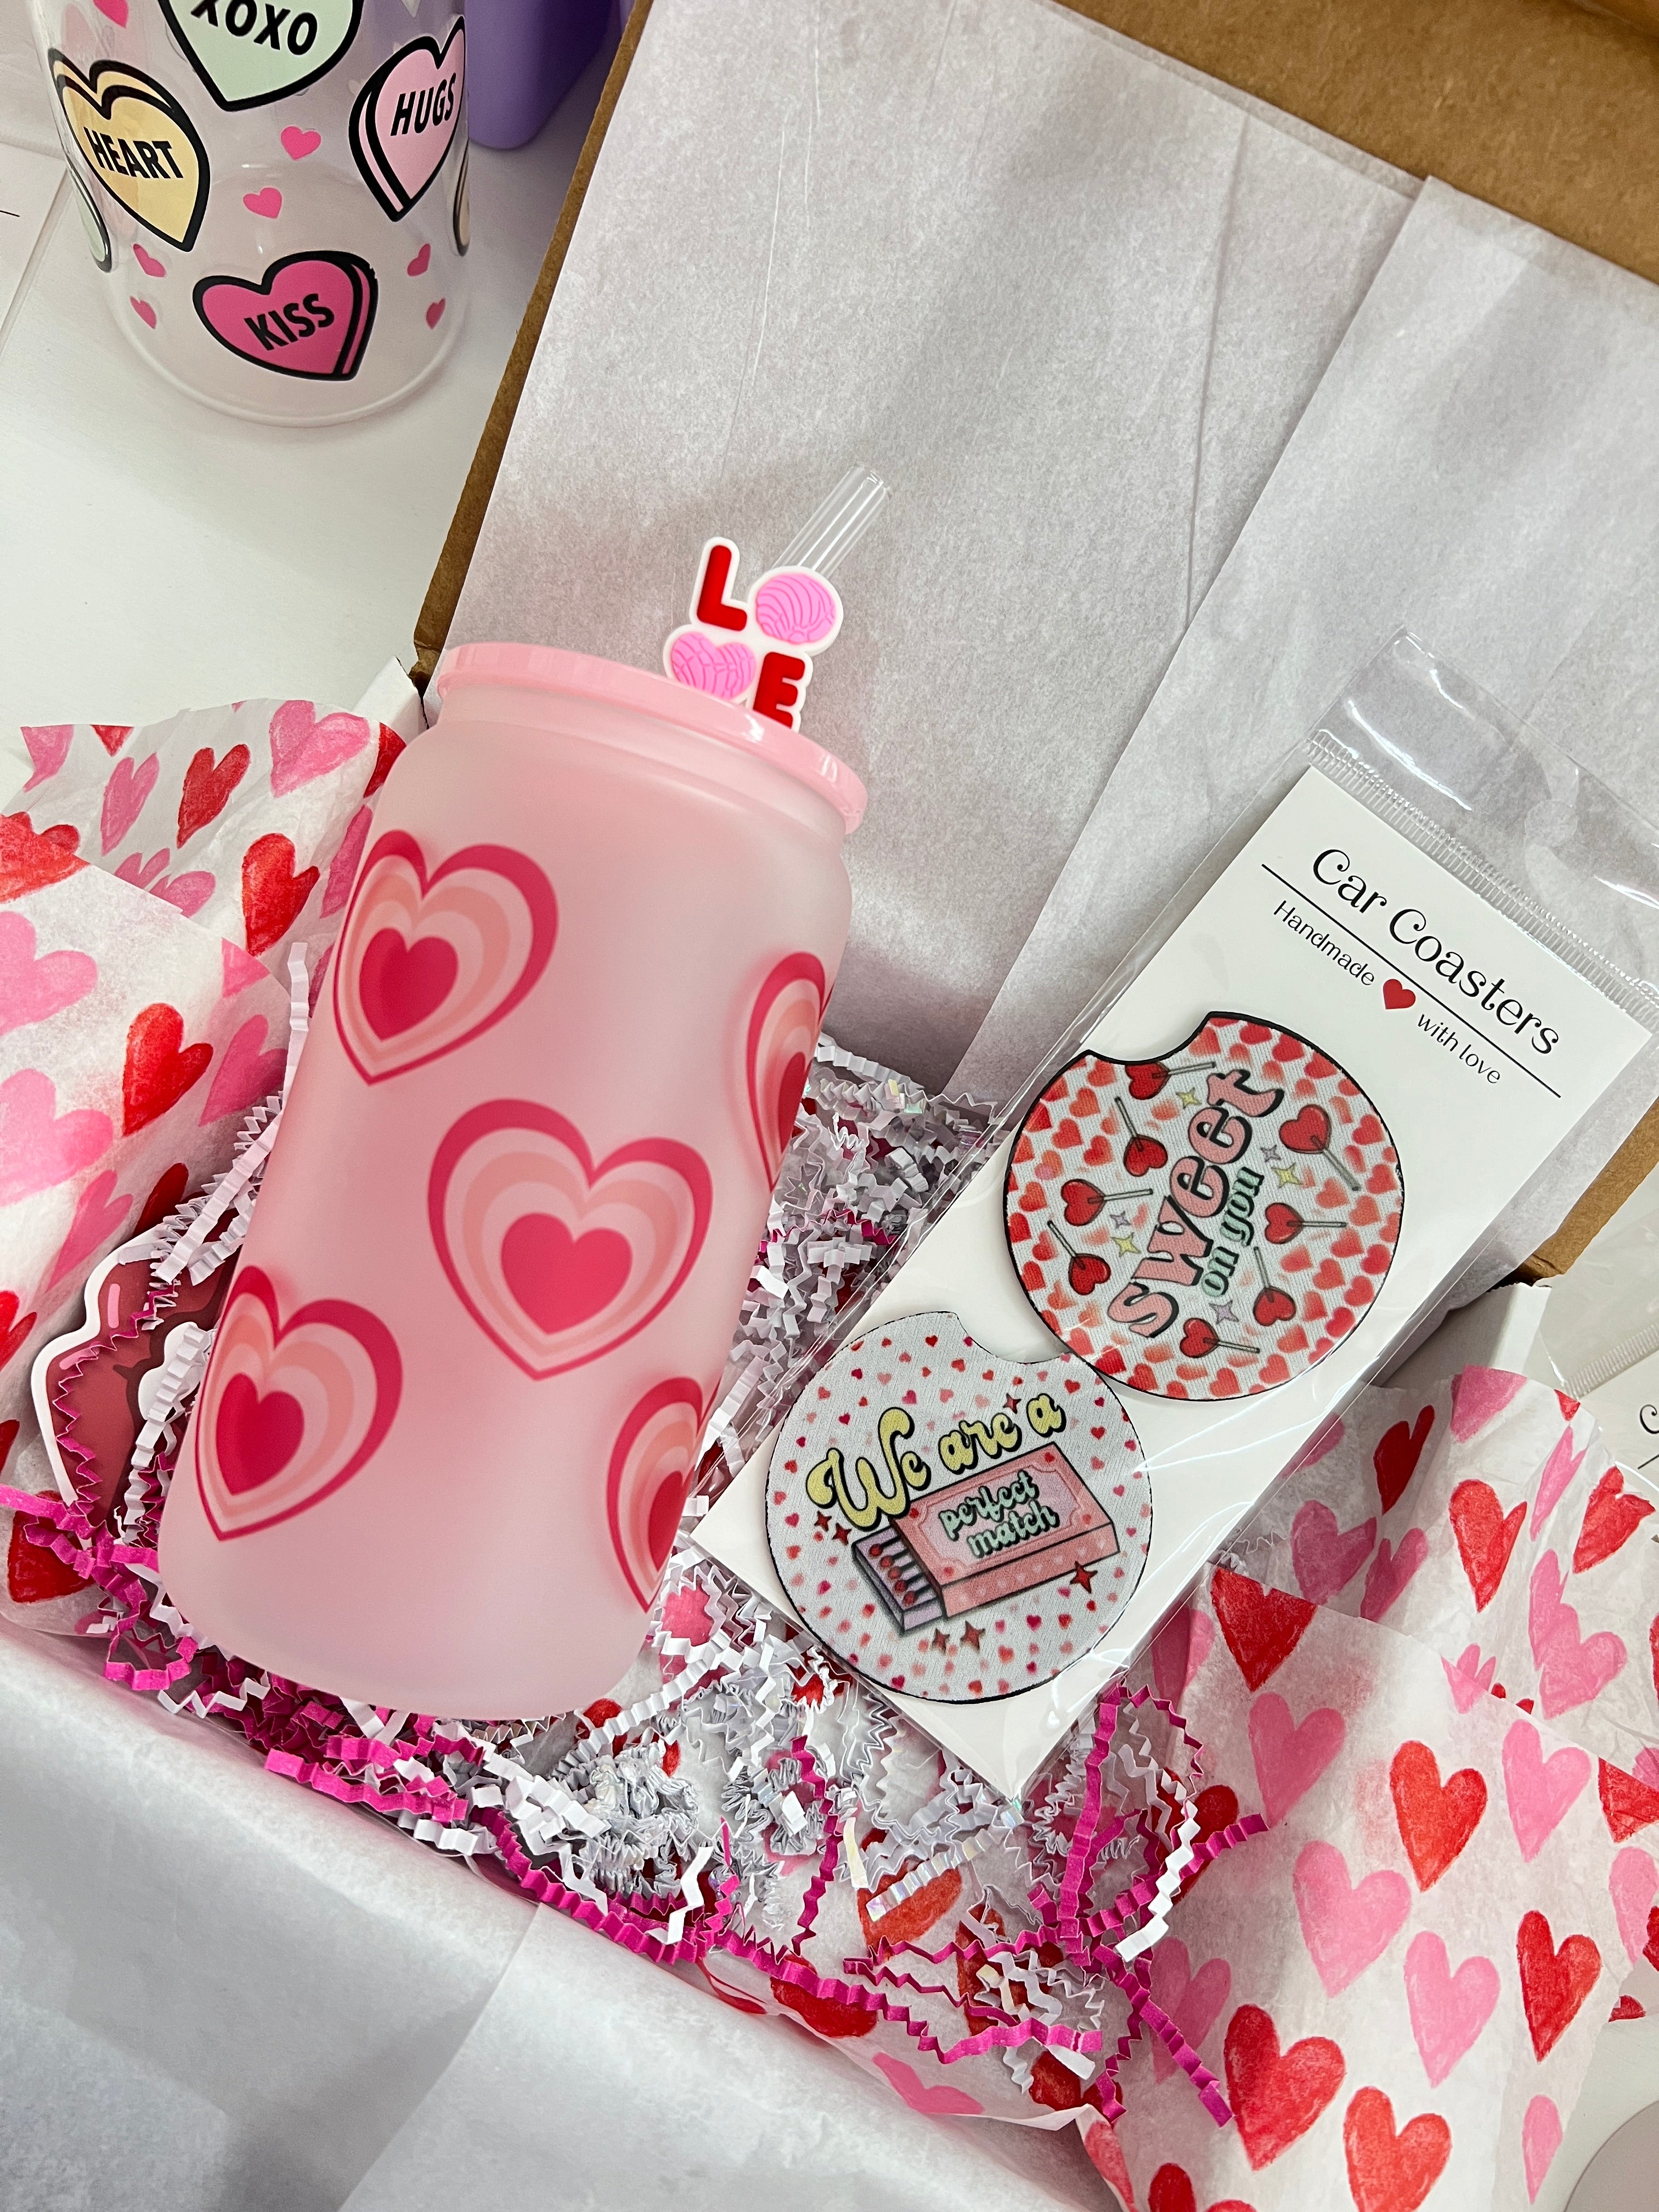 16oz glass cup heart combo